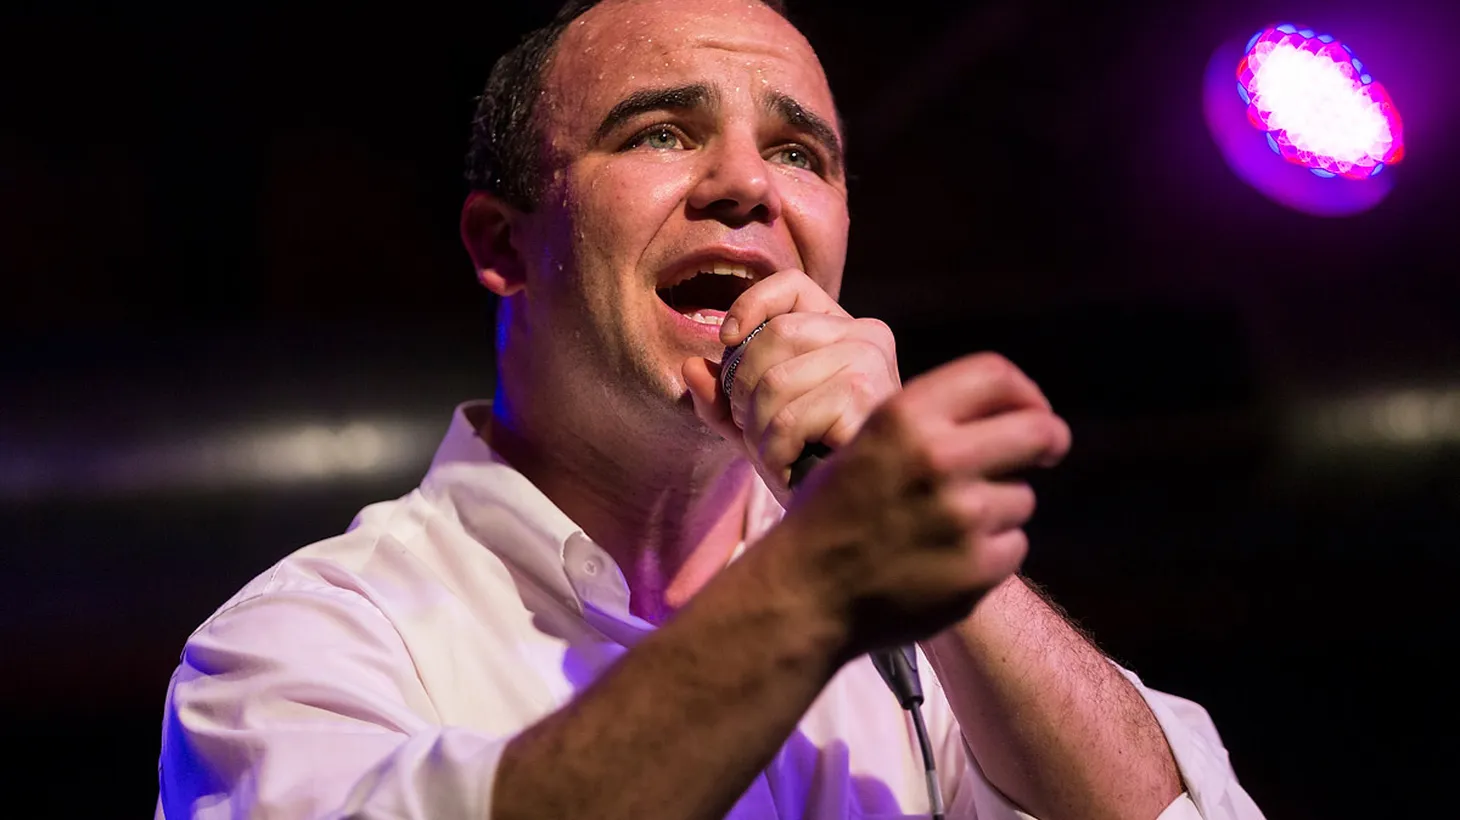 The last few years have been a whirlwind for Baltimore synth-pop trio Future Islands.